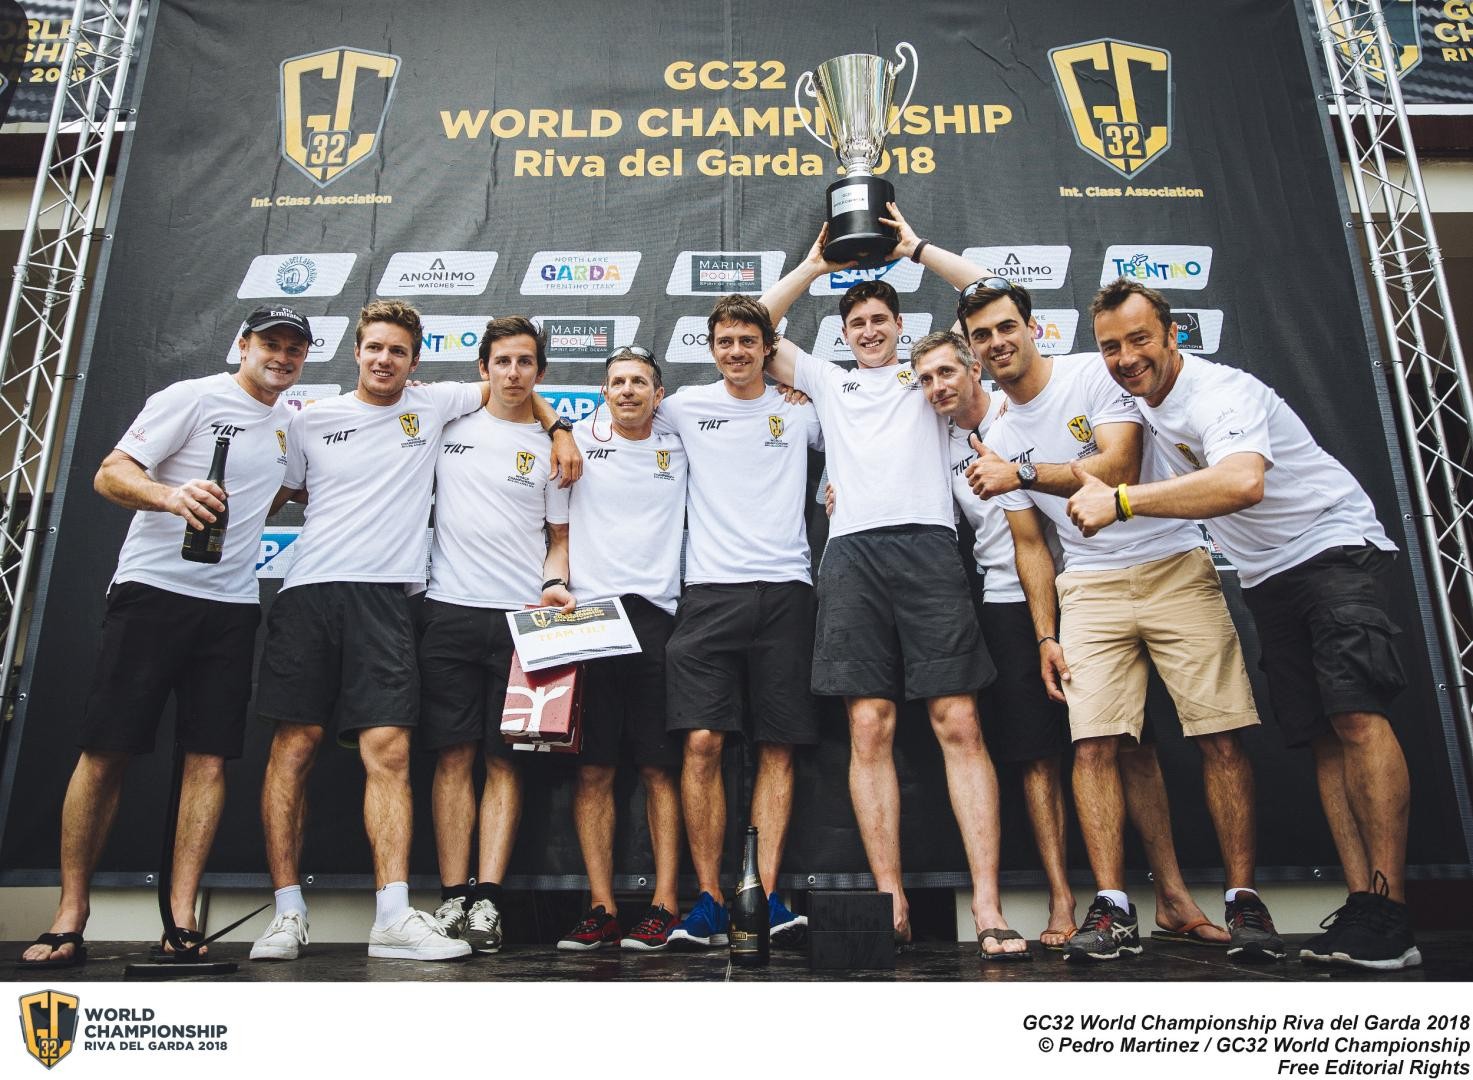 Team Tilt crowned first GC32 World Champions